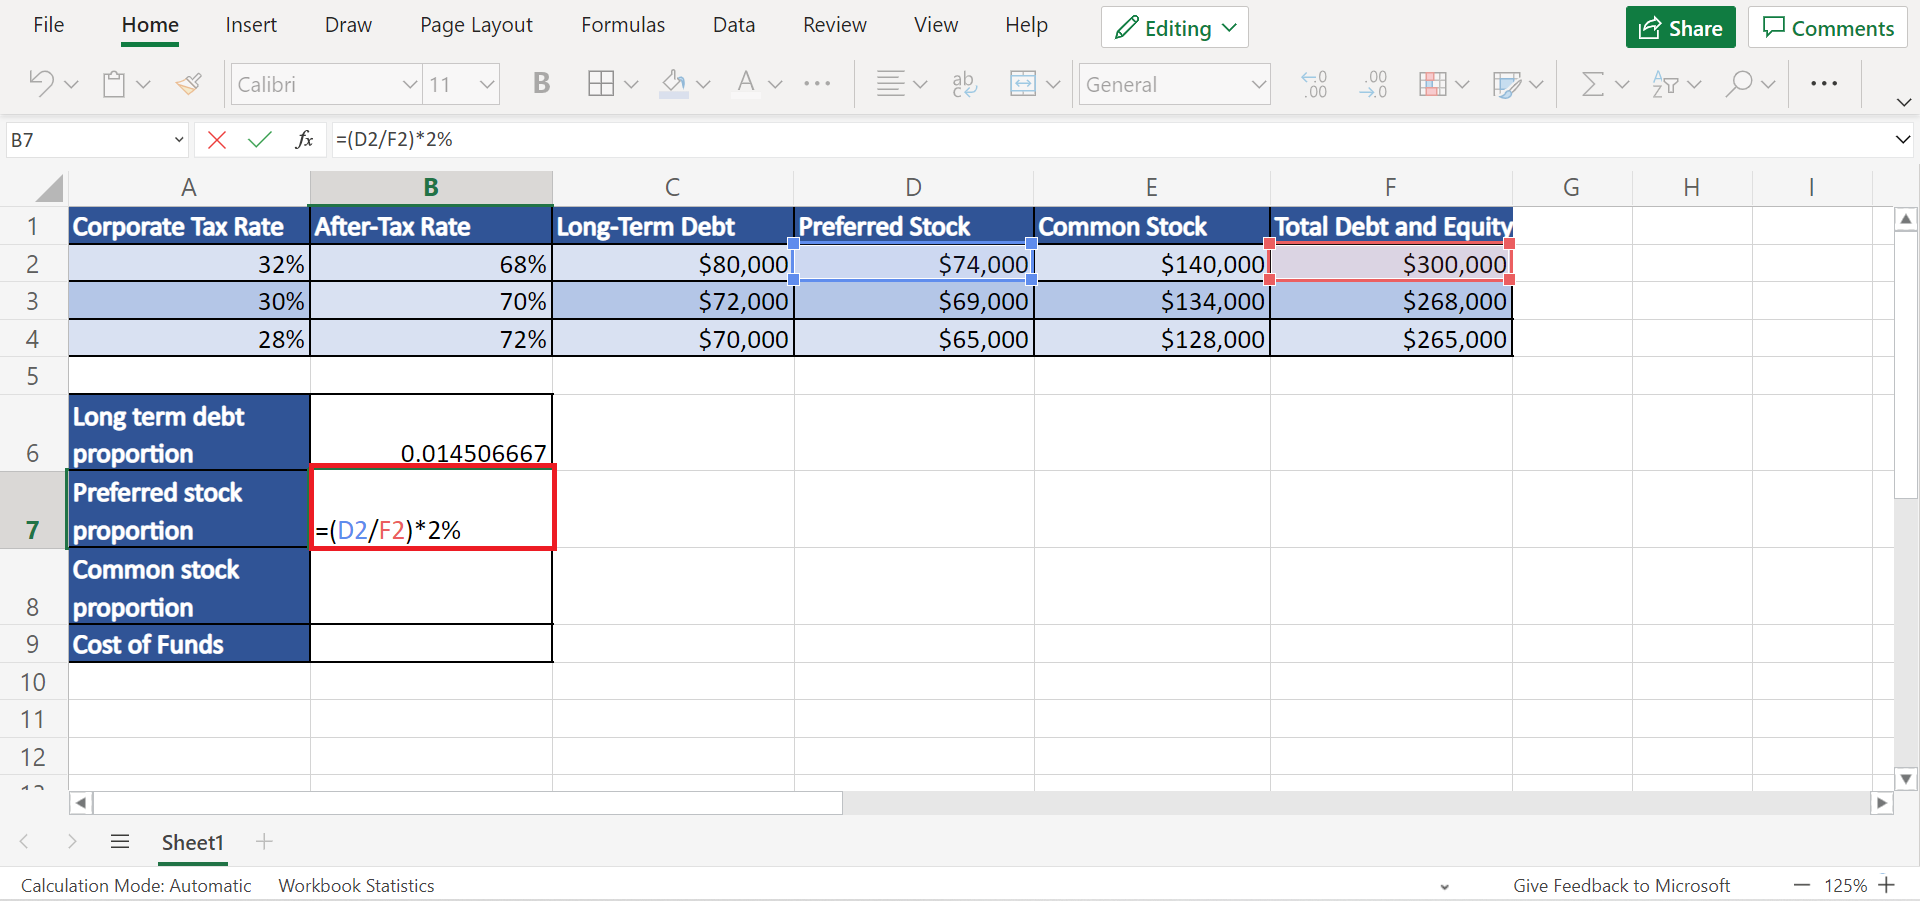 Calculate Cost of Funds in Excel